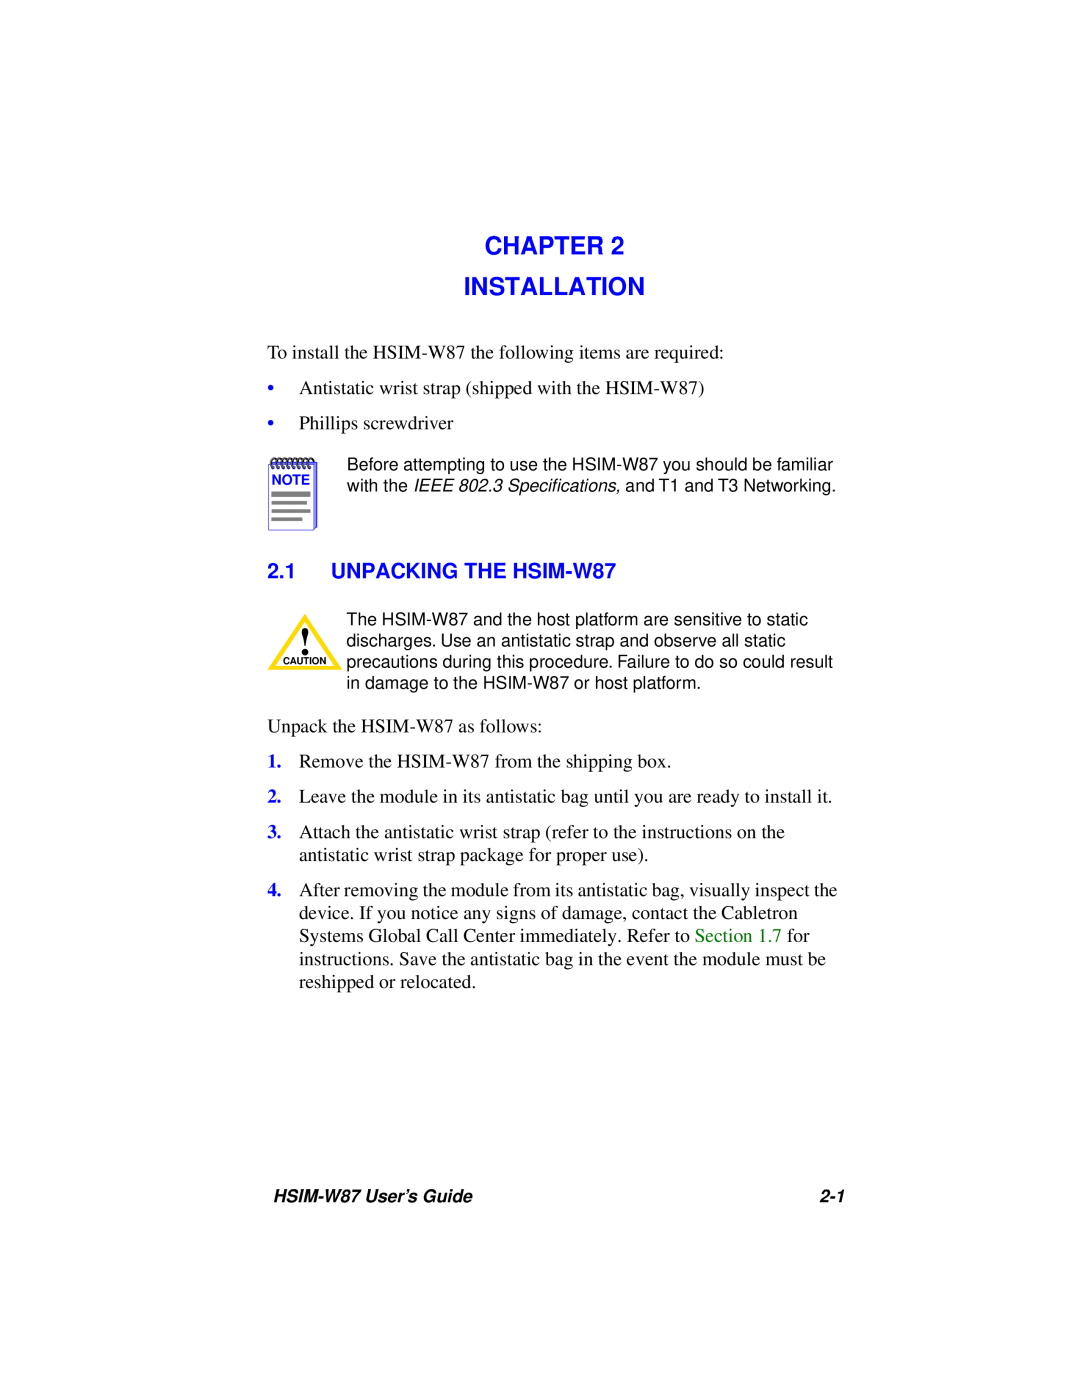 Cabletron Systems manual Chapter Installation, UNPACKING THE HSIM-W87 